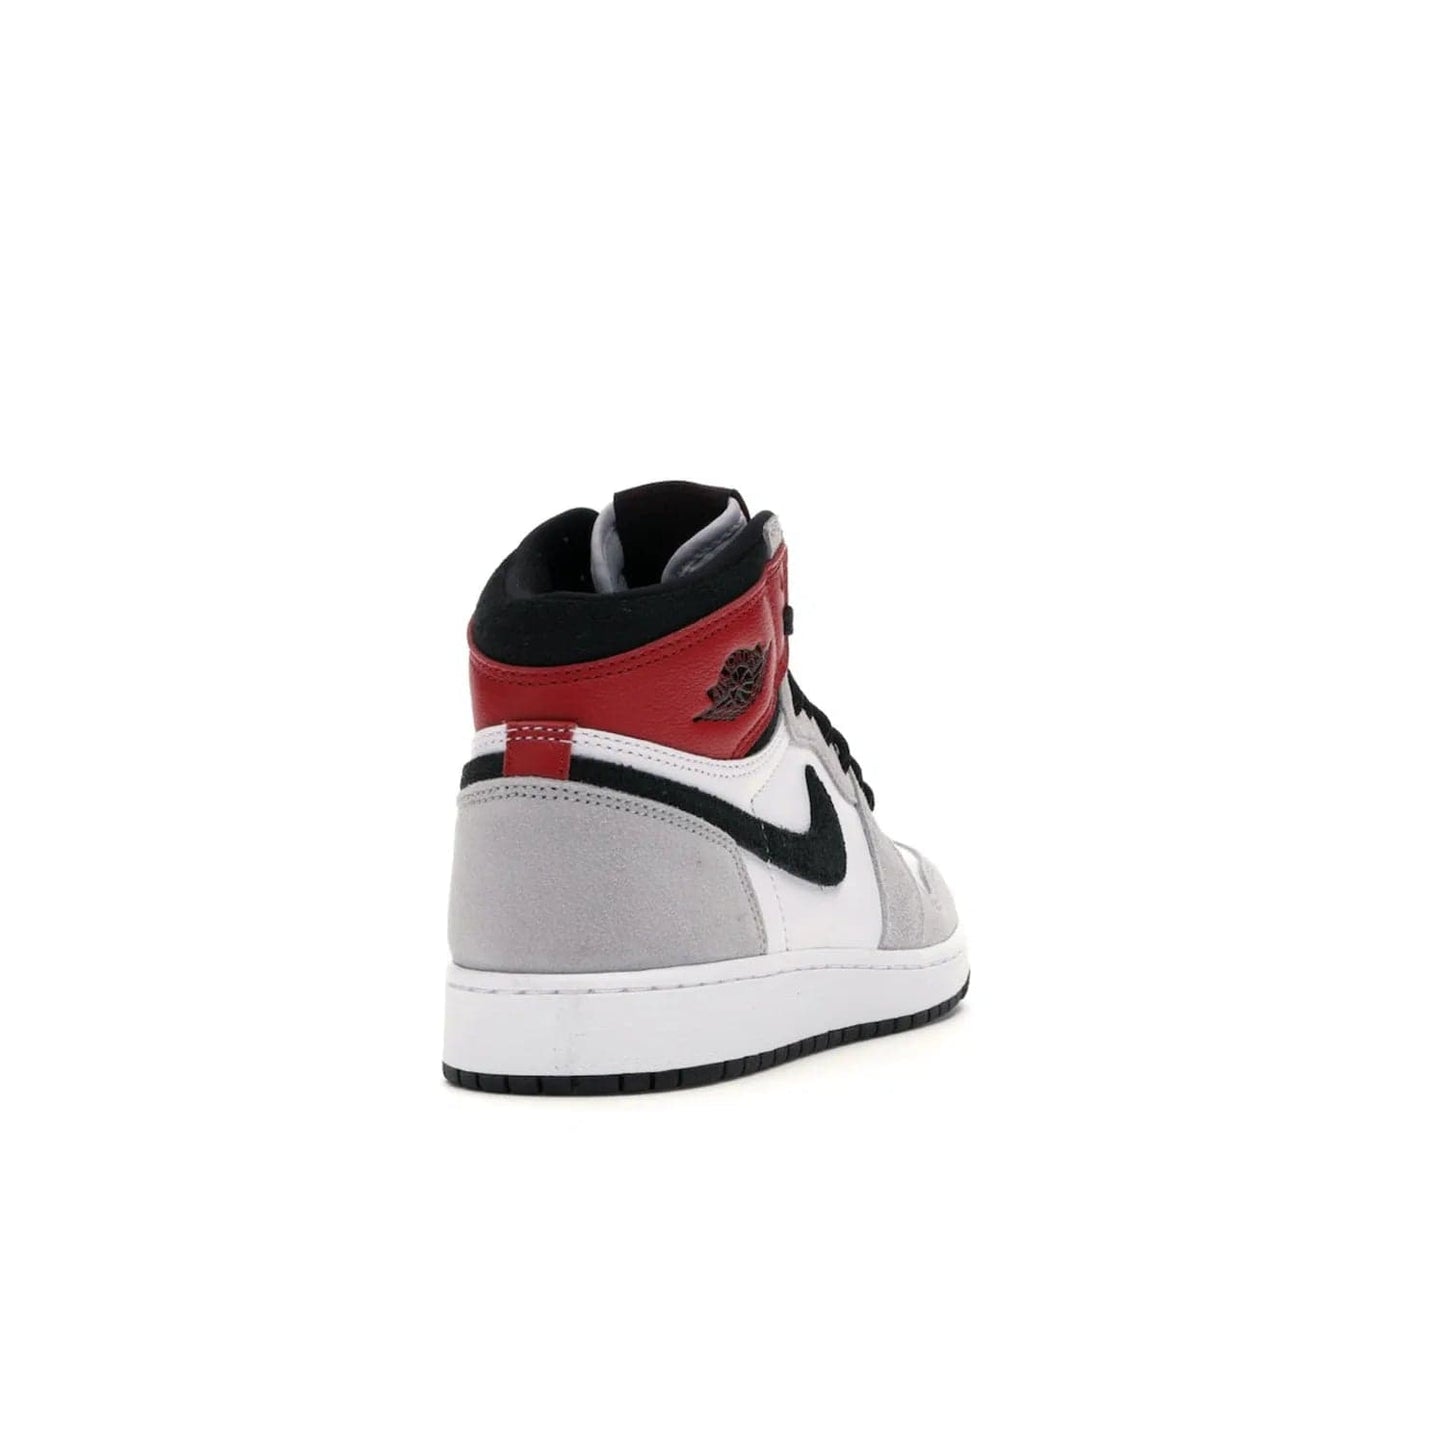 Jordan 1 Retro High Light Smoke Grey (GS) - Image 30 - Only at www.BallersClubKickz.com - Jordan 1 Retro High Light Smoke Grey (GS) features shades of grey, black, and Varsity Red with a bold silhouette. Premium white leather and suede overlays create a unique look. Released July 2020, offering style and performance. Perfect sneaker for any collector or fan.